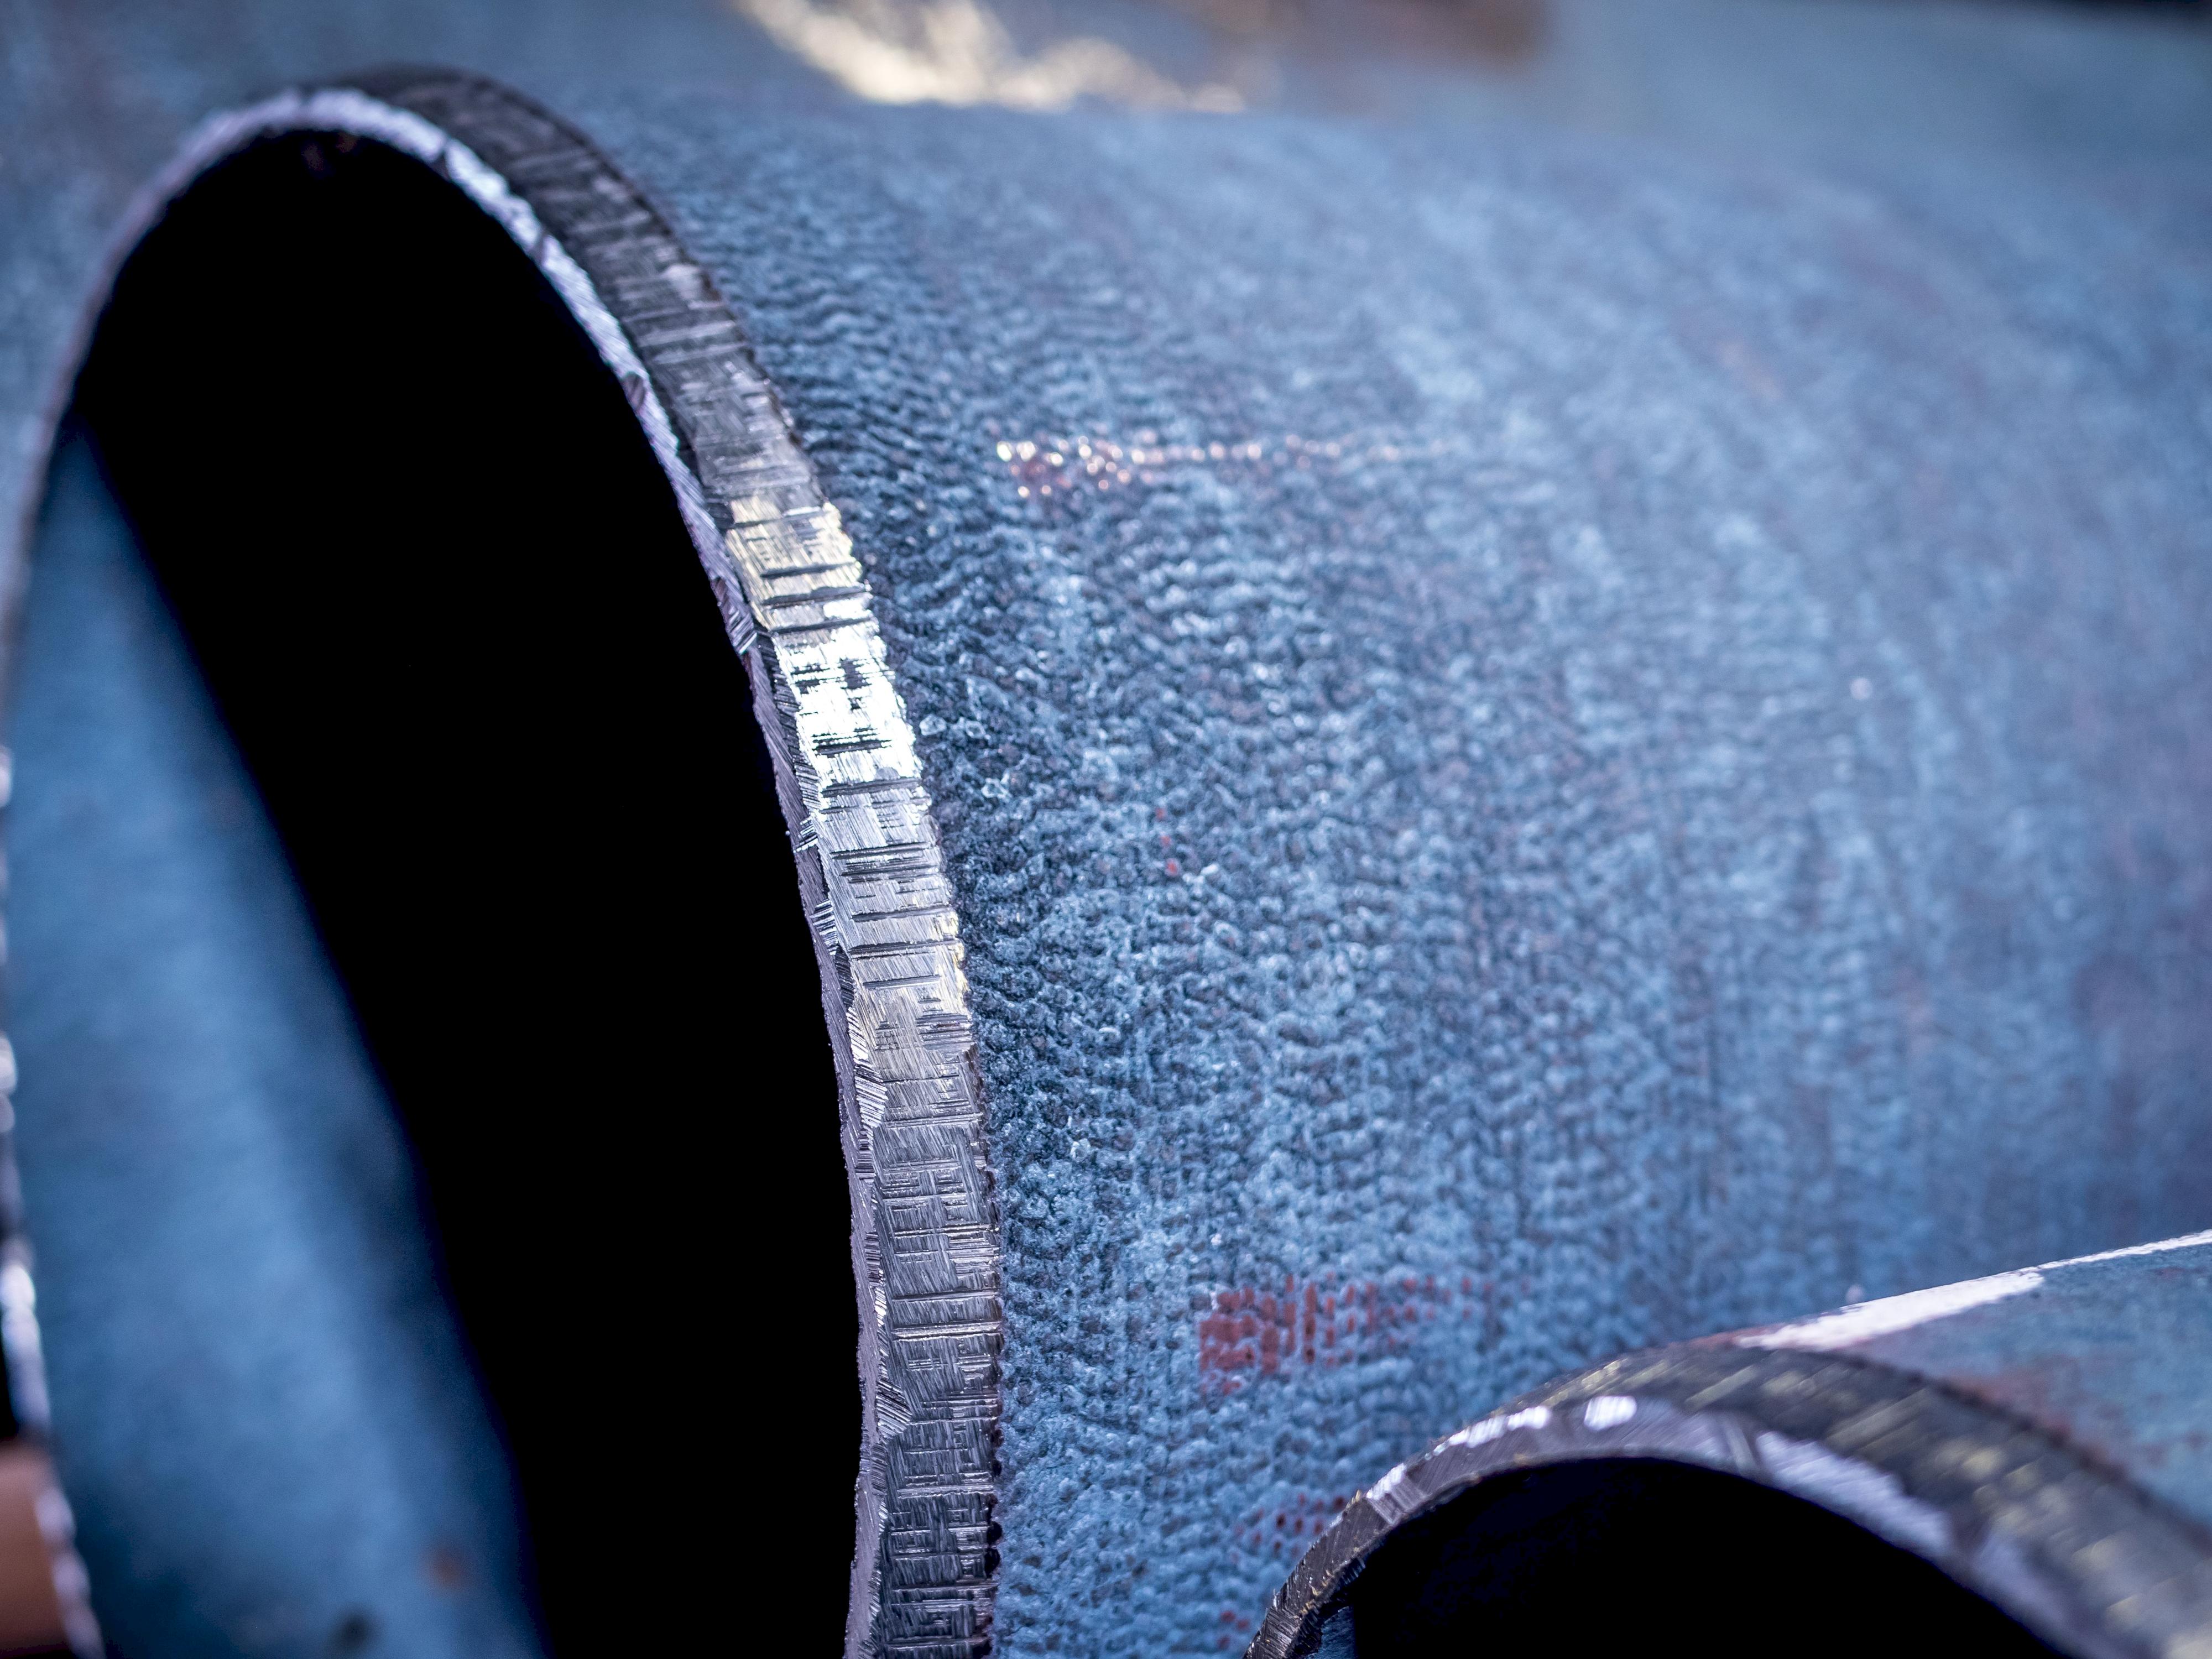 Cutting ductile iron pipe